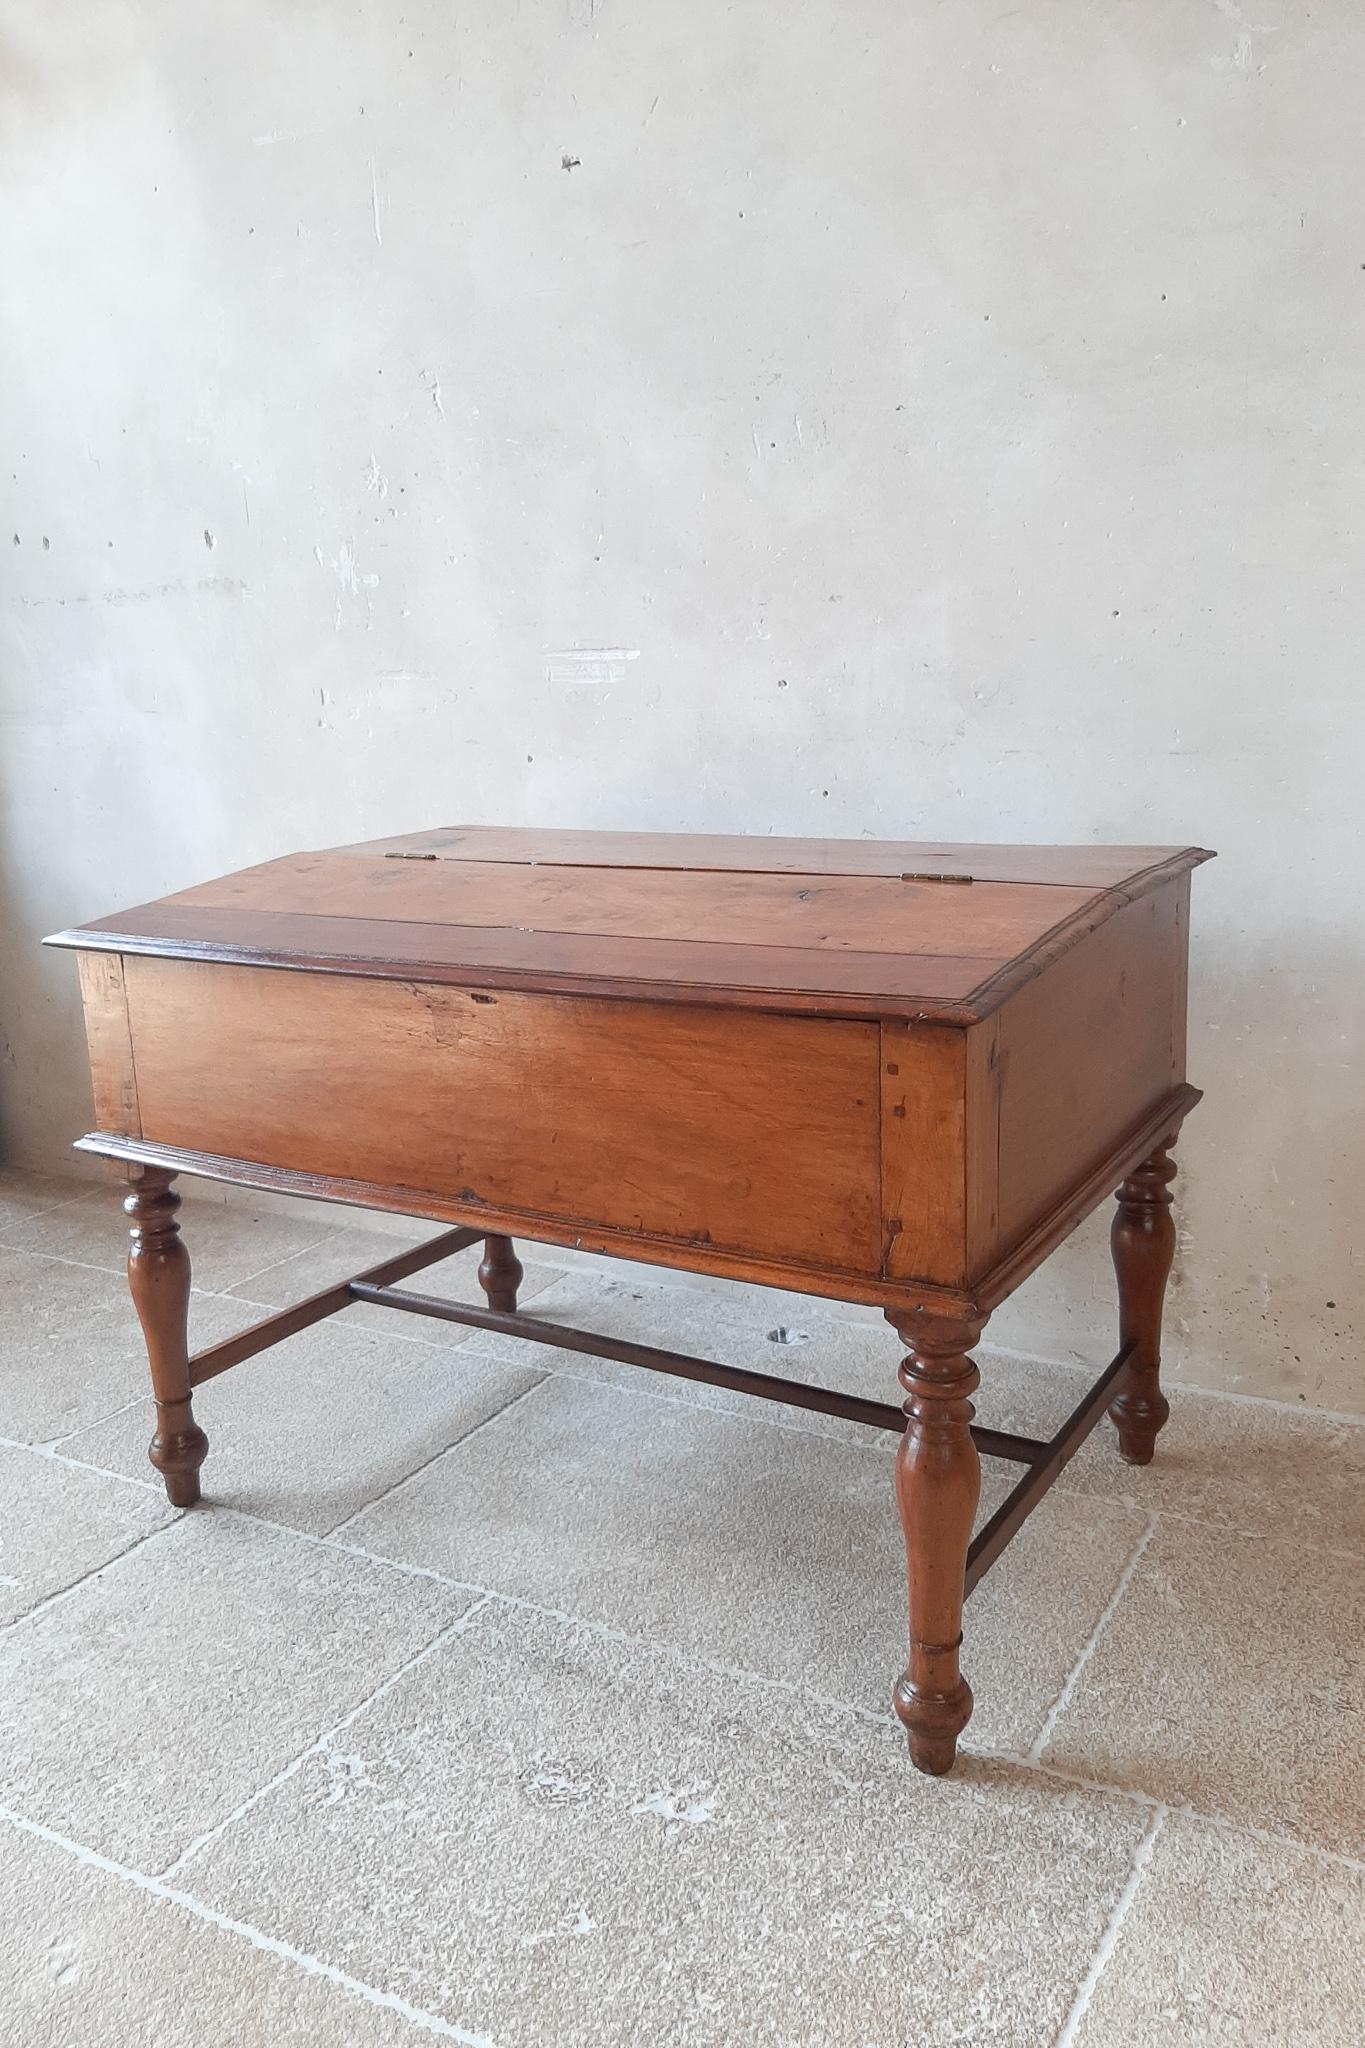 19th century antique French mahogany wooden, low by the ground, childrens writing desk. This lift top desk has a little drawer and secret compartments. Lovely in a children's room, but also very good usable as a coffee table or side table. The